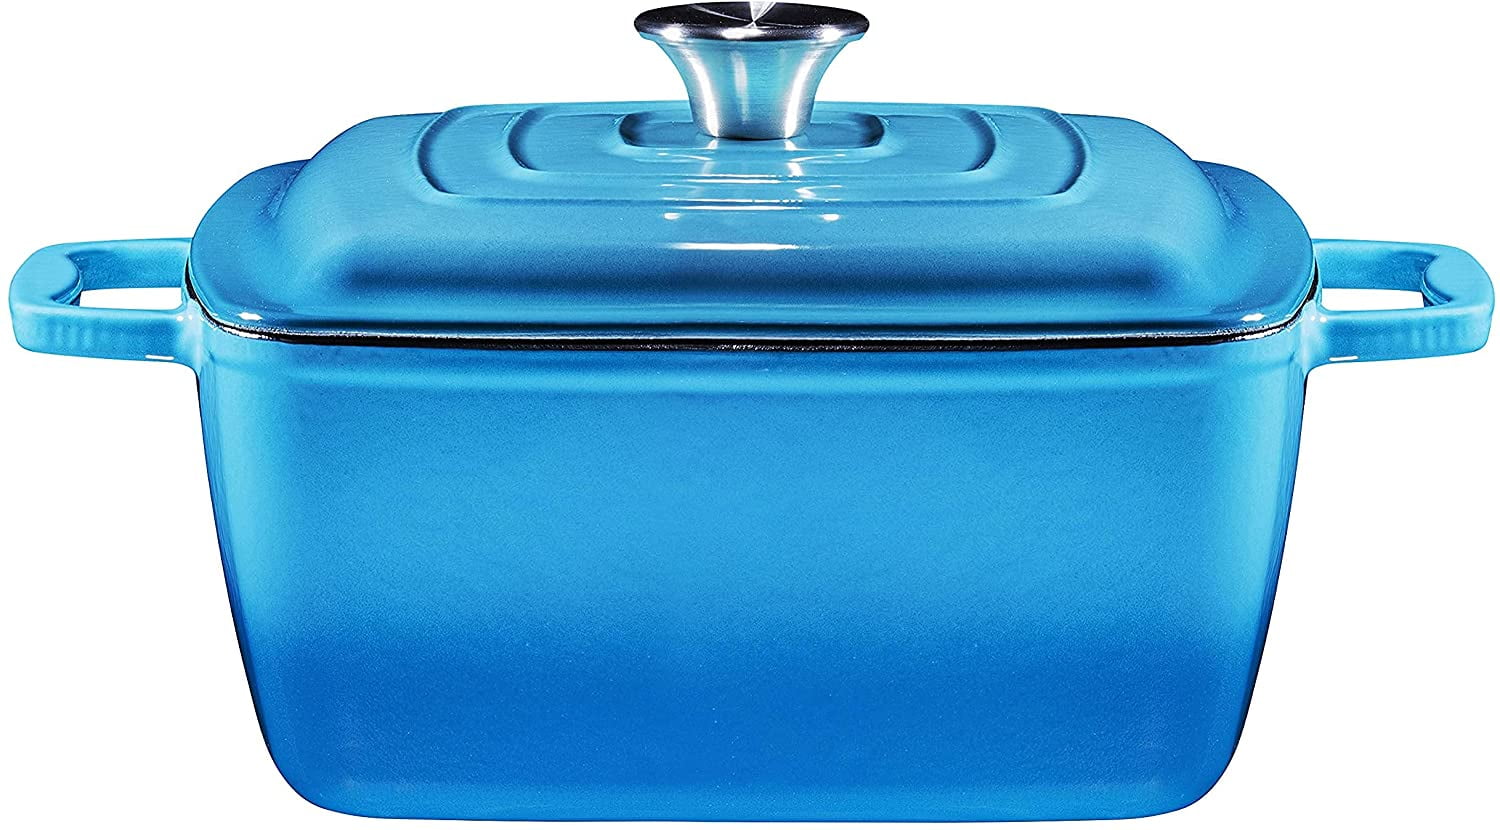 ROYDX Dutch Oven Pot with Lid, Enameled Cast Iron Coated Dutch  Oven,Casserole Dish, Braiser Pan with Dual Handles for Bread Baking,  Cooking, Oven